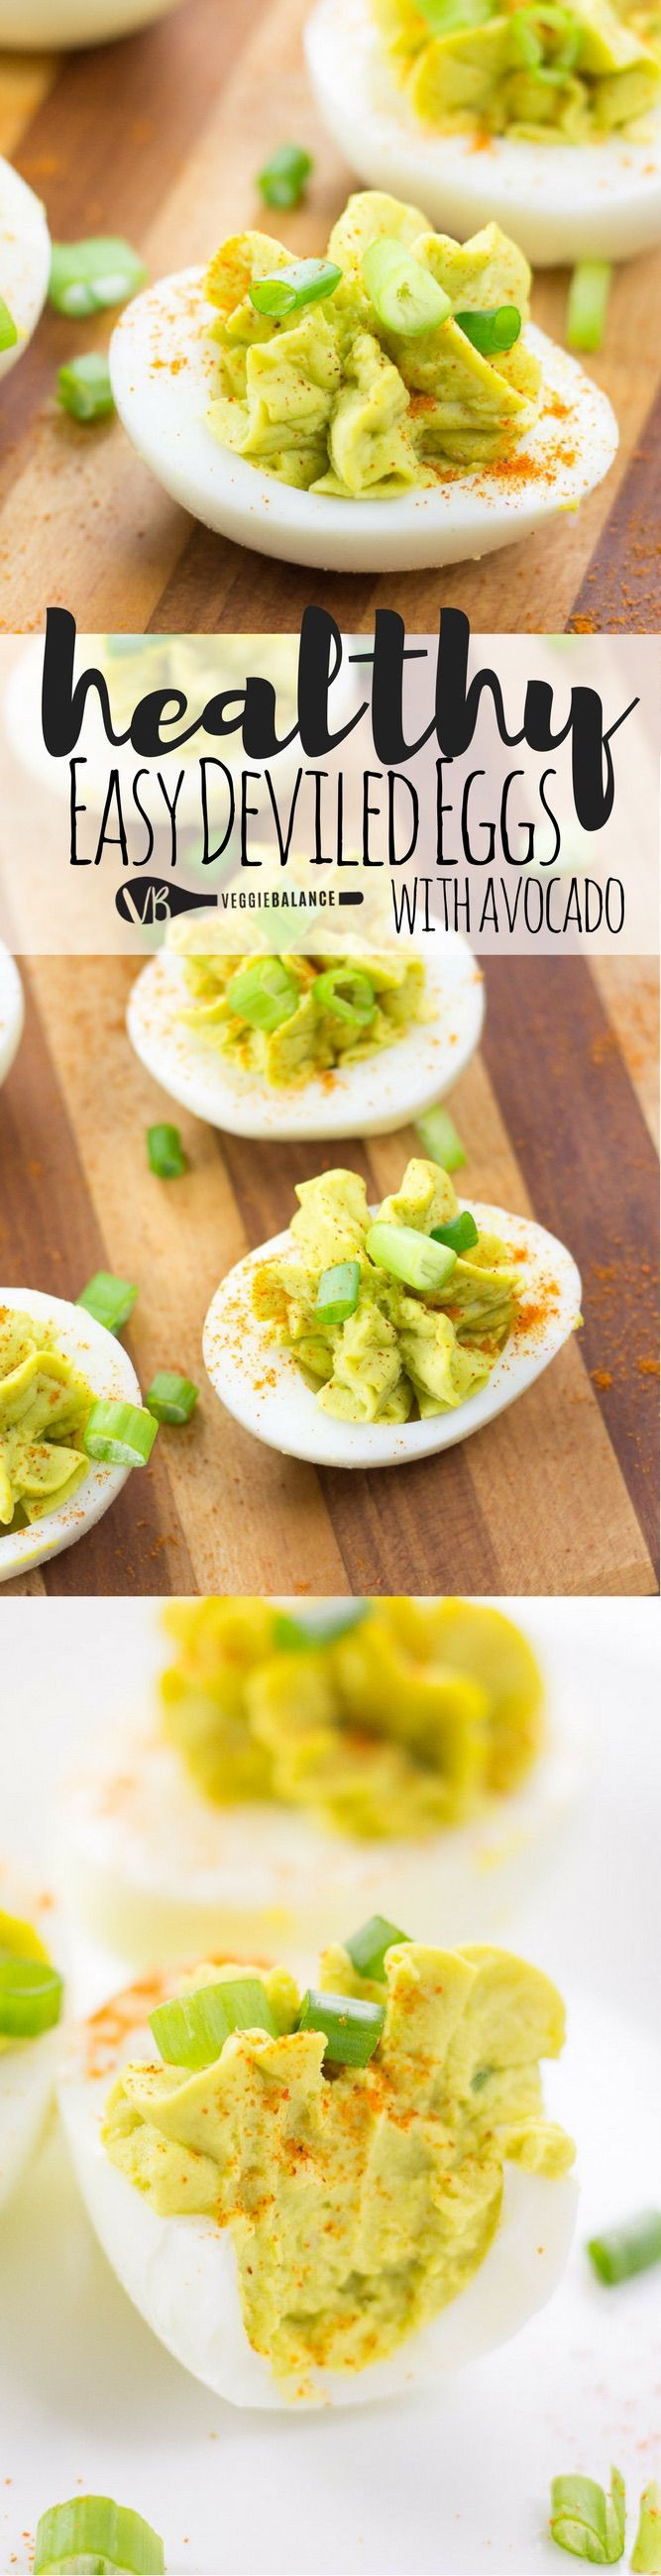 Healthy Deviled Eggs Recipe
 25 best ideas about Healthy deviled eggs on Pinterest